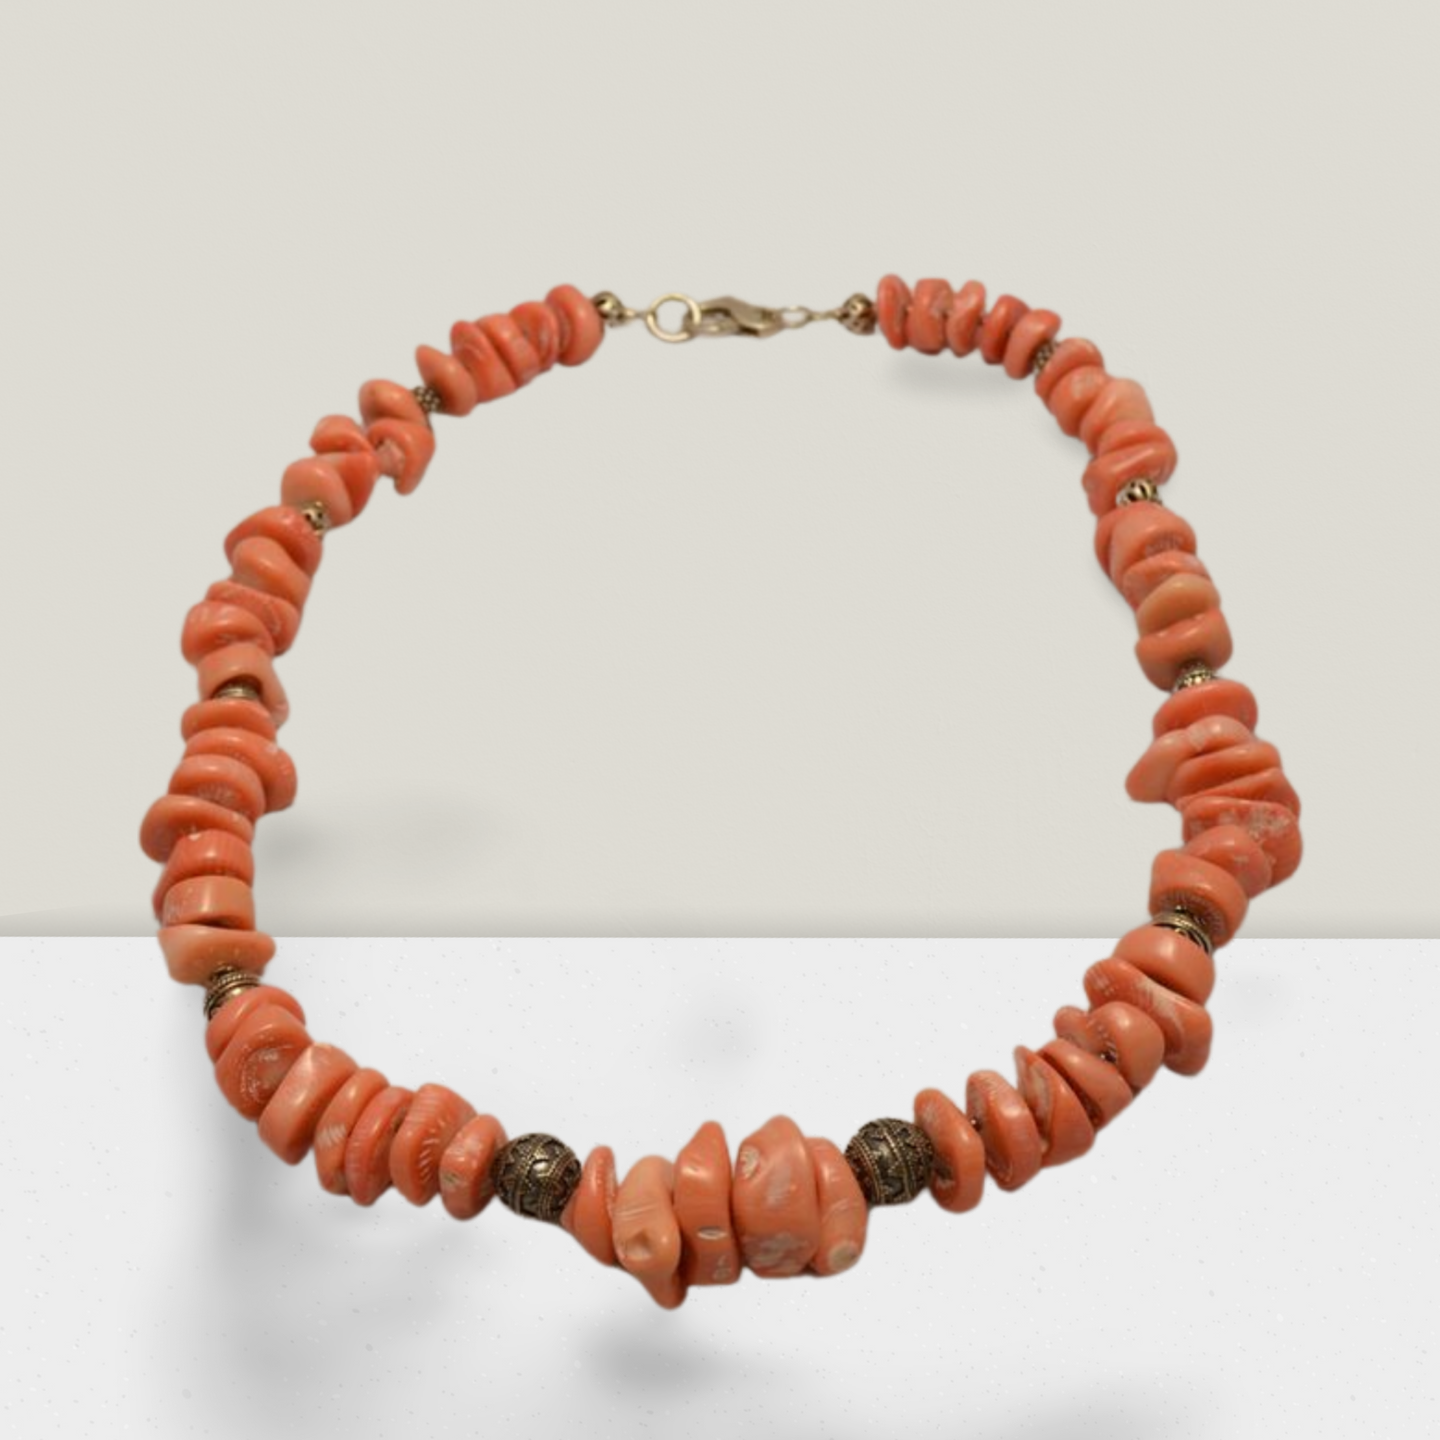 Necklace with baroque Pink Coral Stones (Angel Skin) and Silver Elements